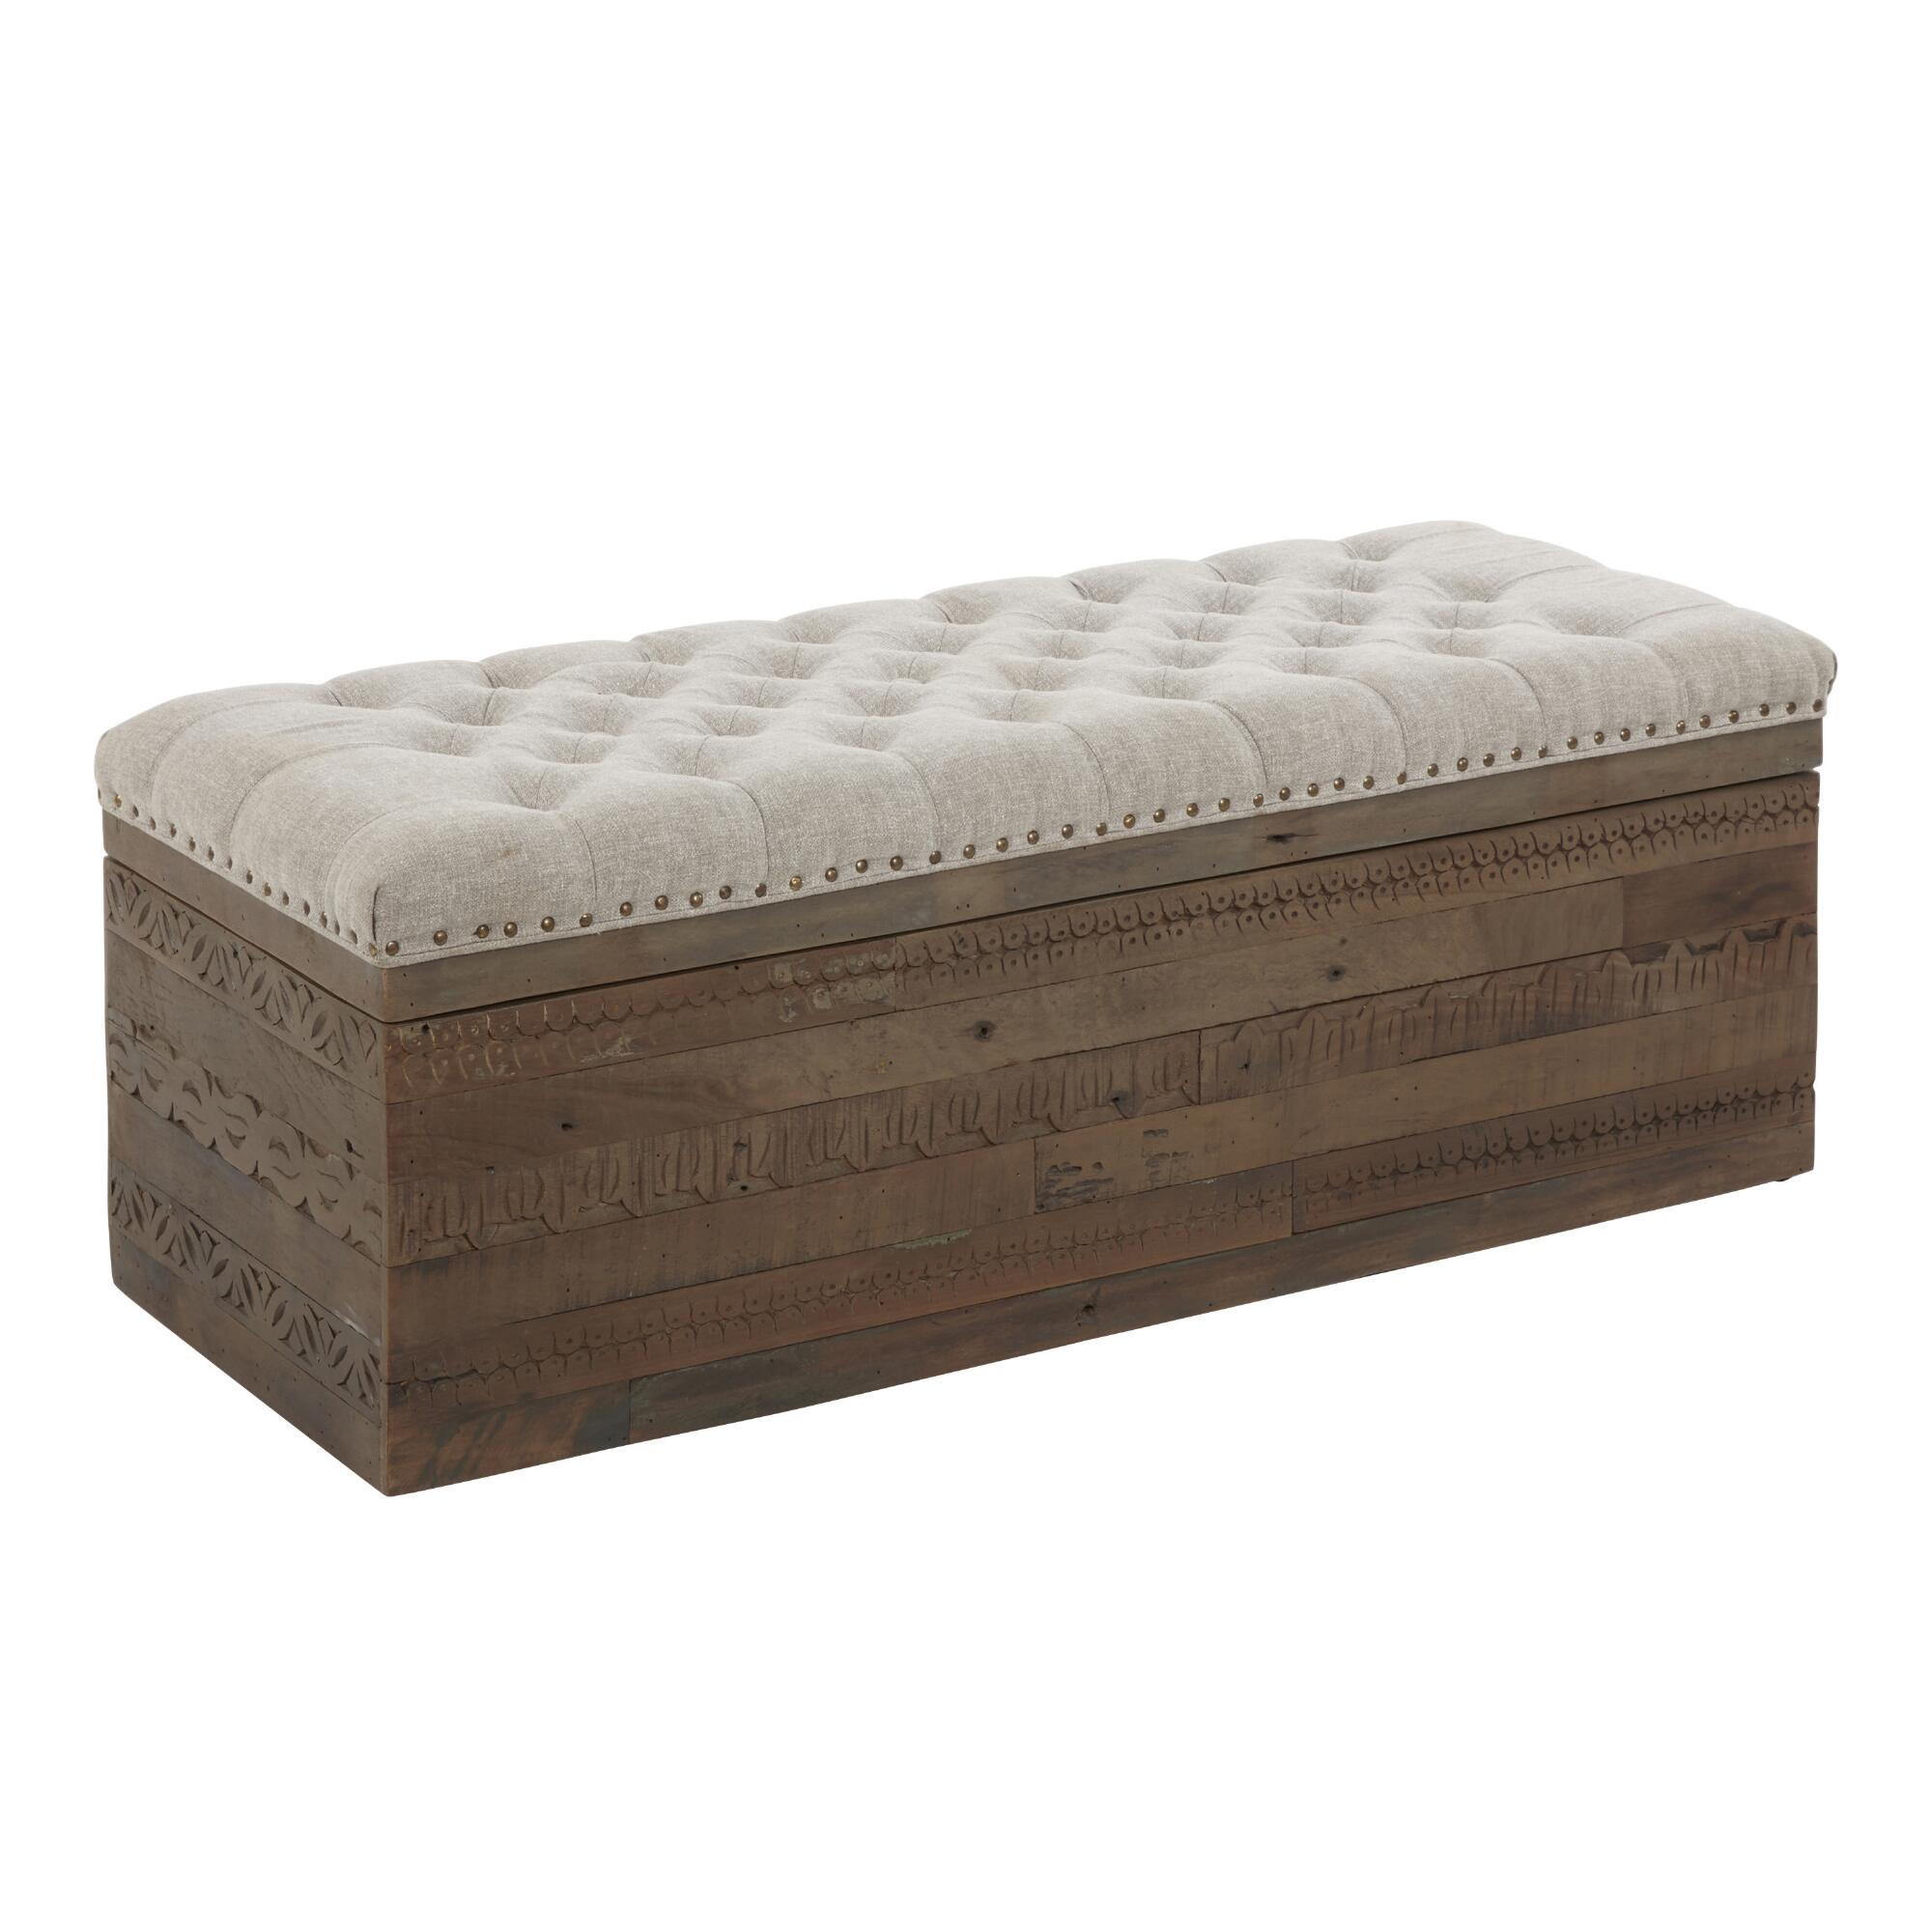 Gray Upholstered Carved Wood Serena Storage Ottoman: Gray/Natural - Fabric by World Market